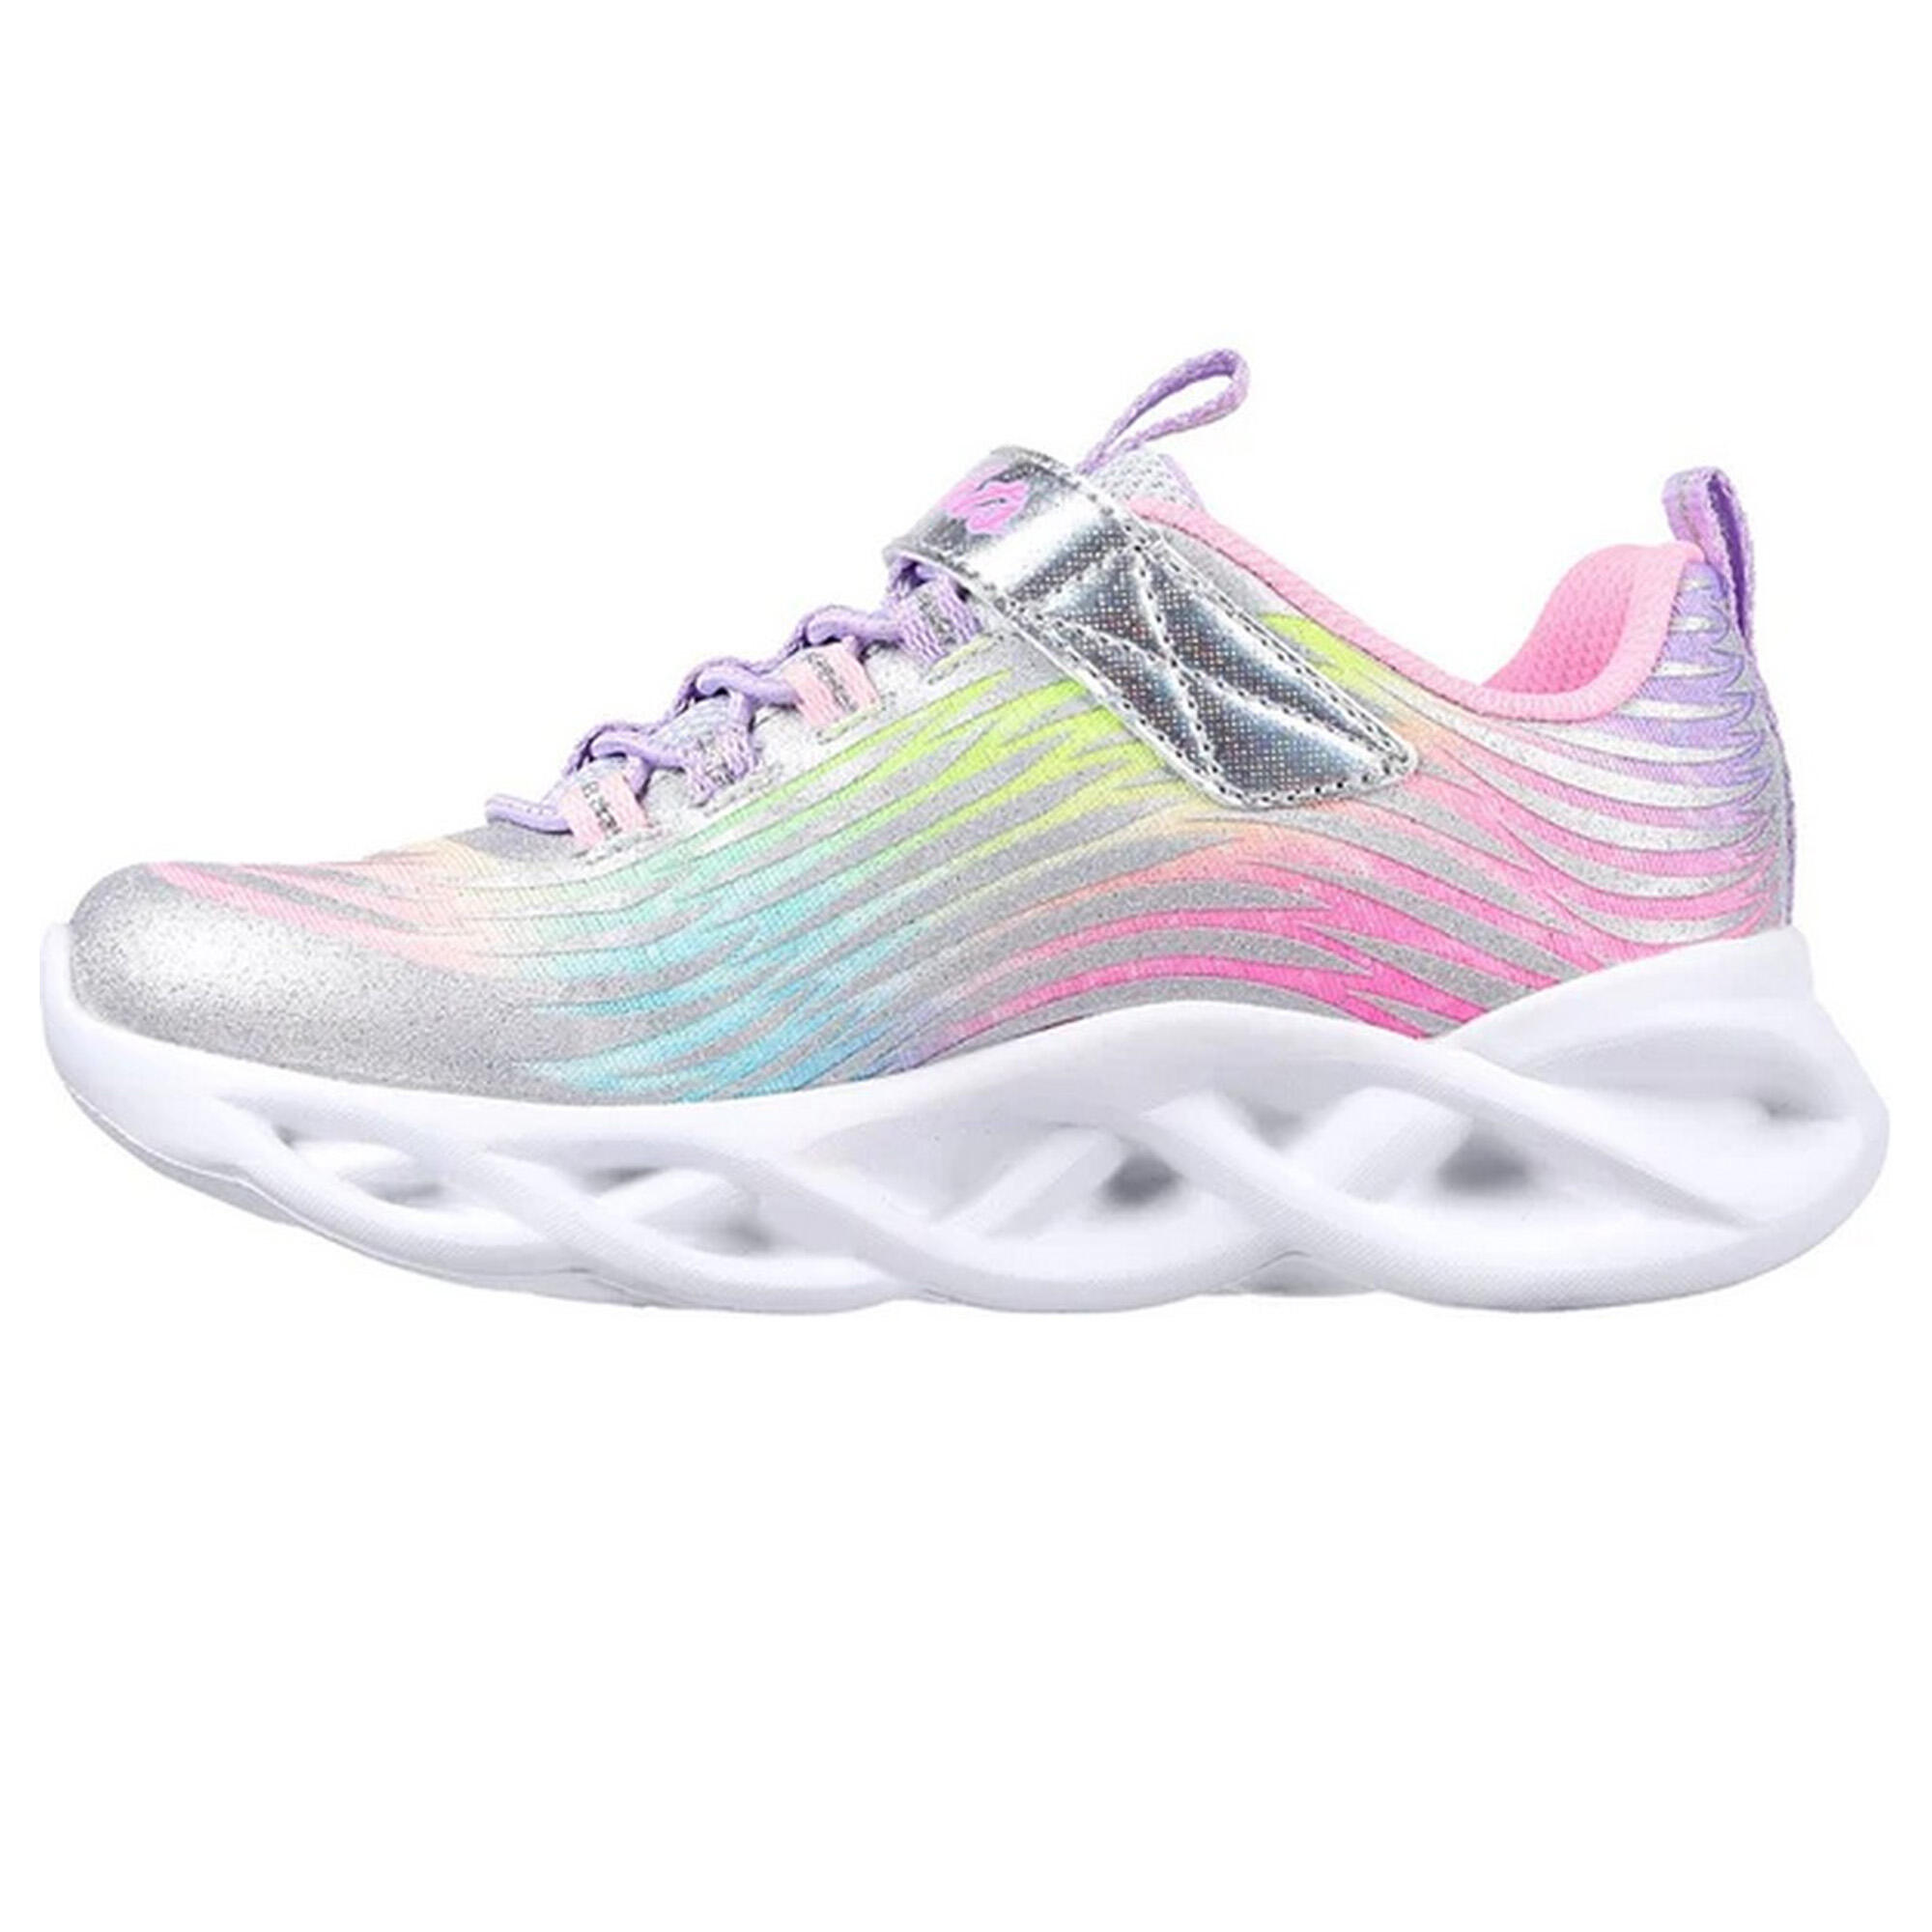 Girls S Lights Twisty Brights Mystical Bliss Trainers (Multicoloured) 2/5